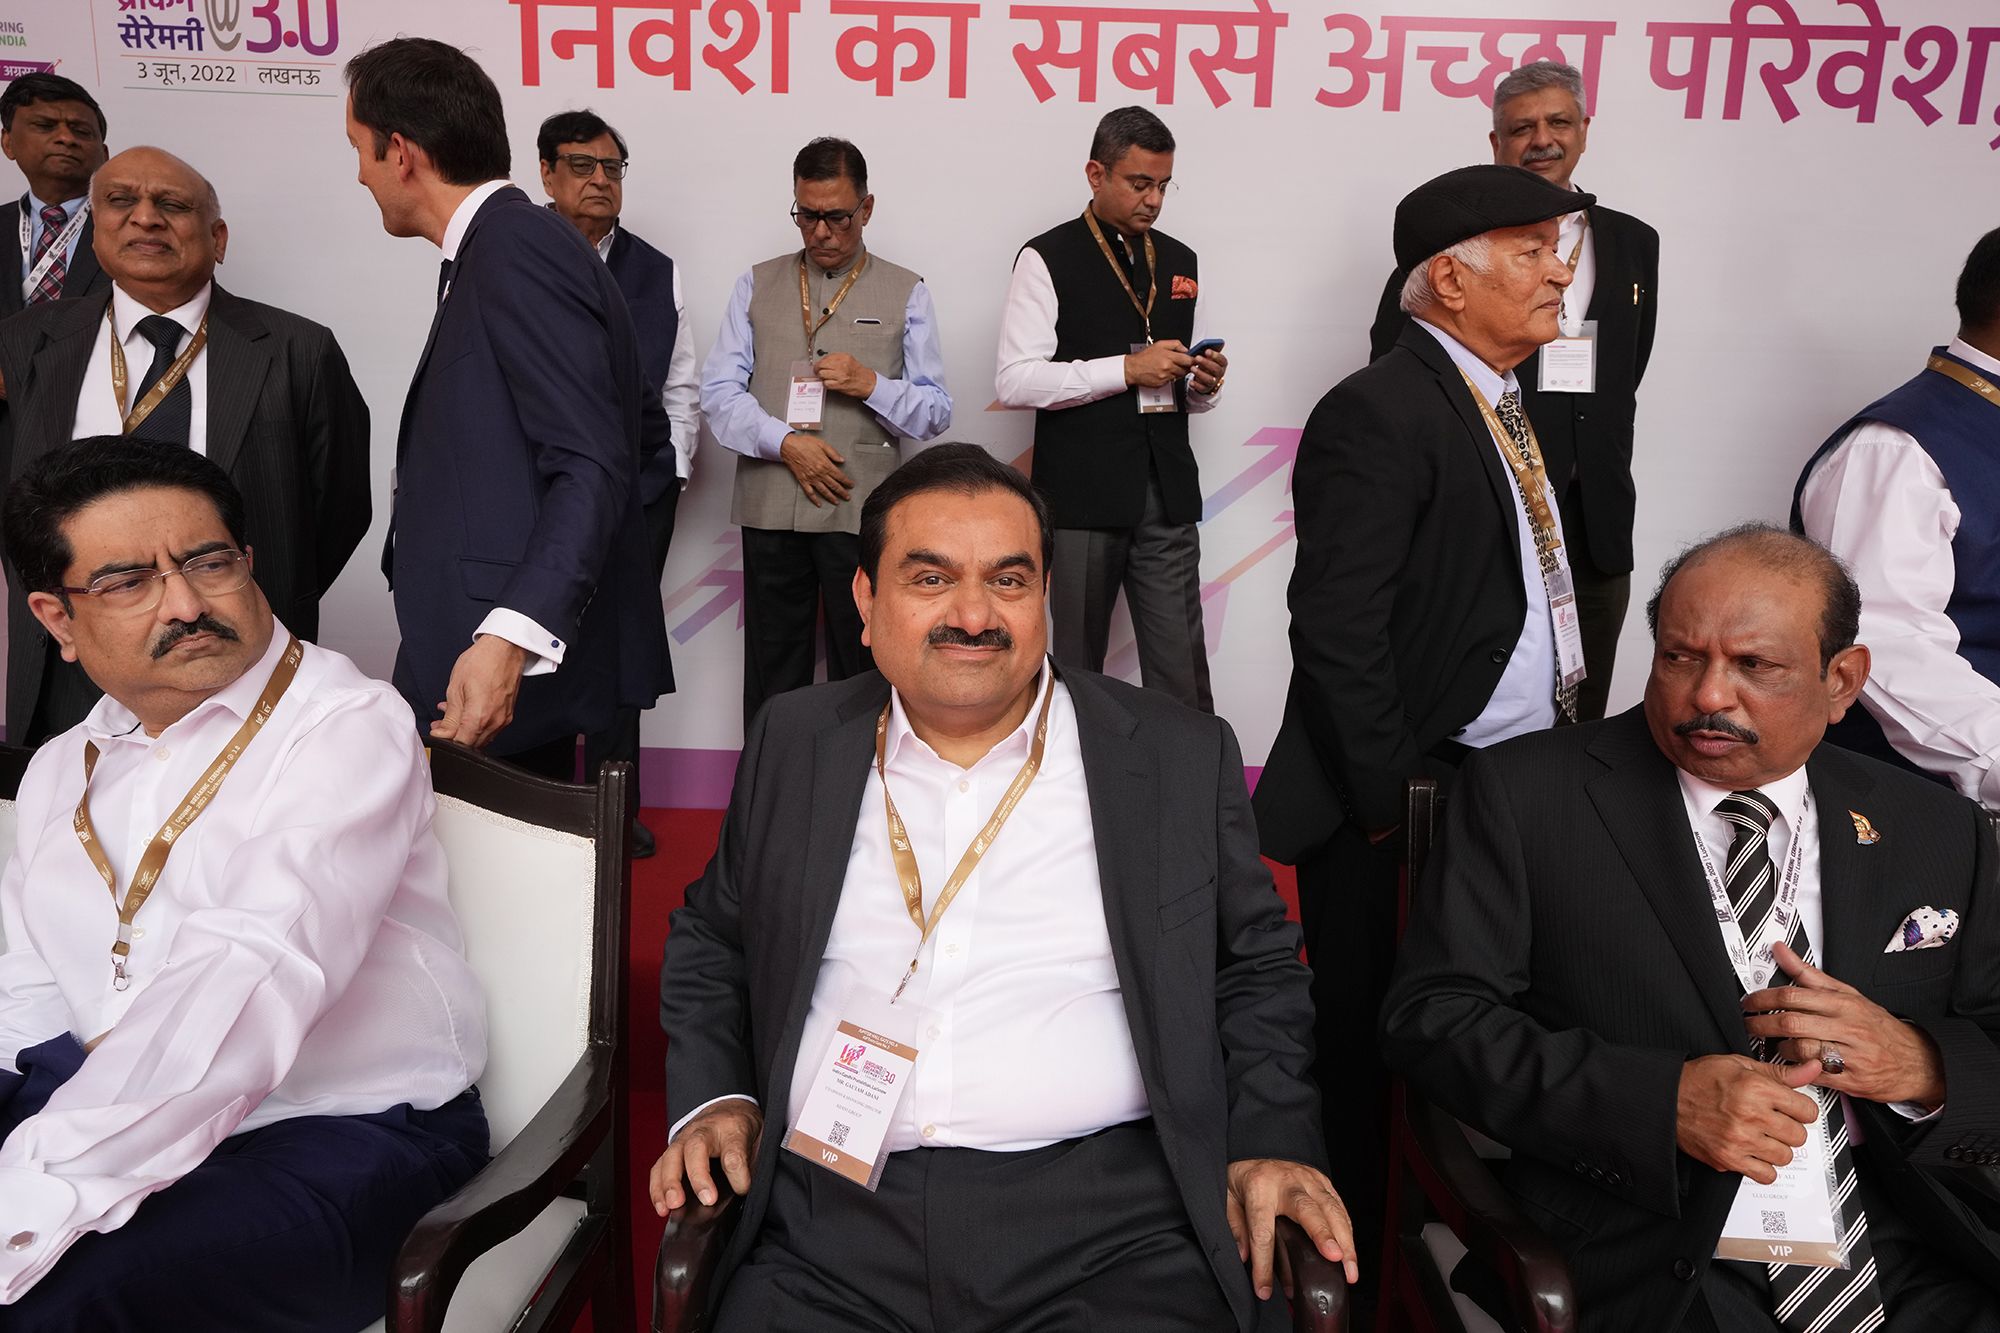 Indian billionaire Gautam Adani was a college dropout. Now he may